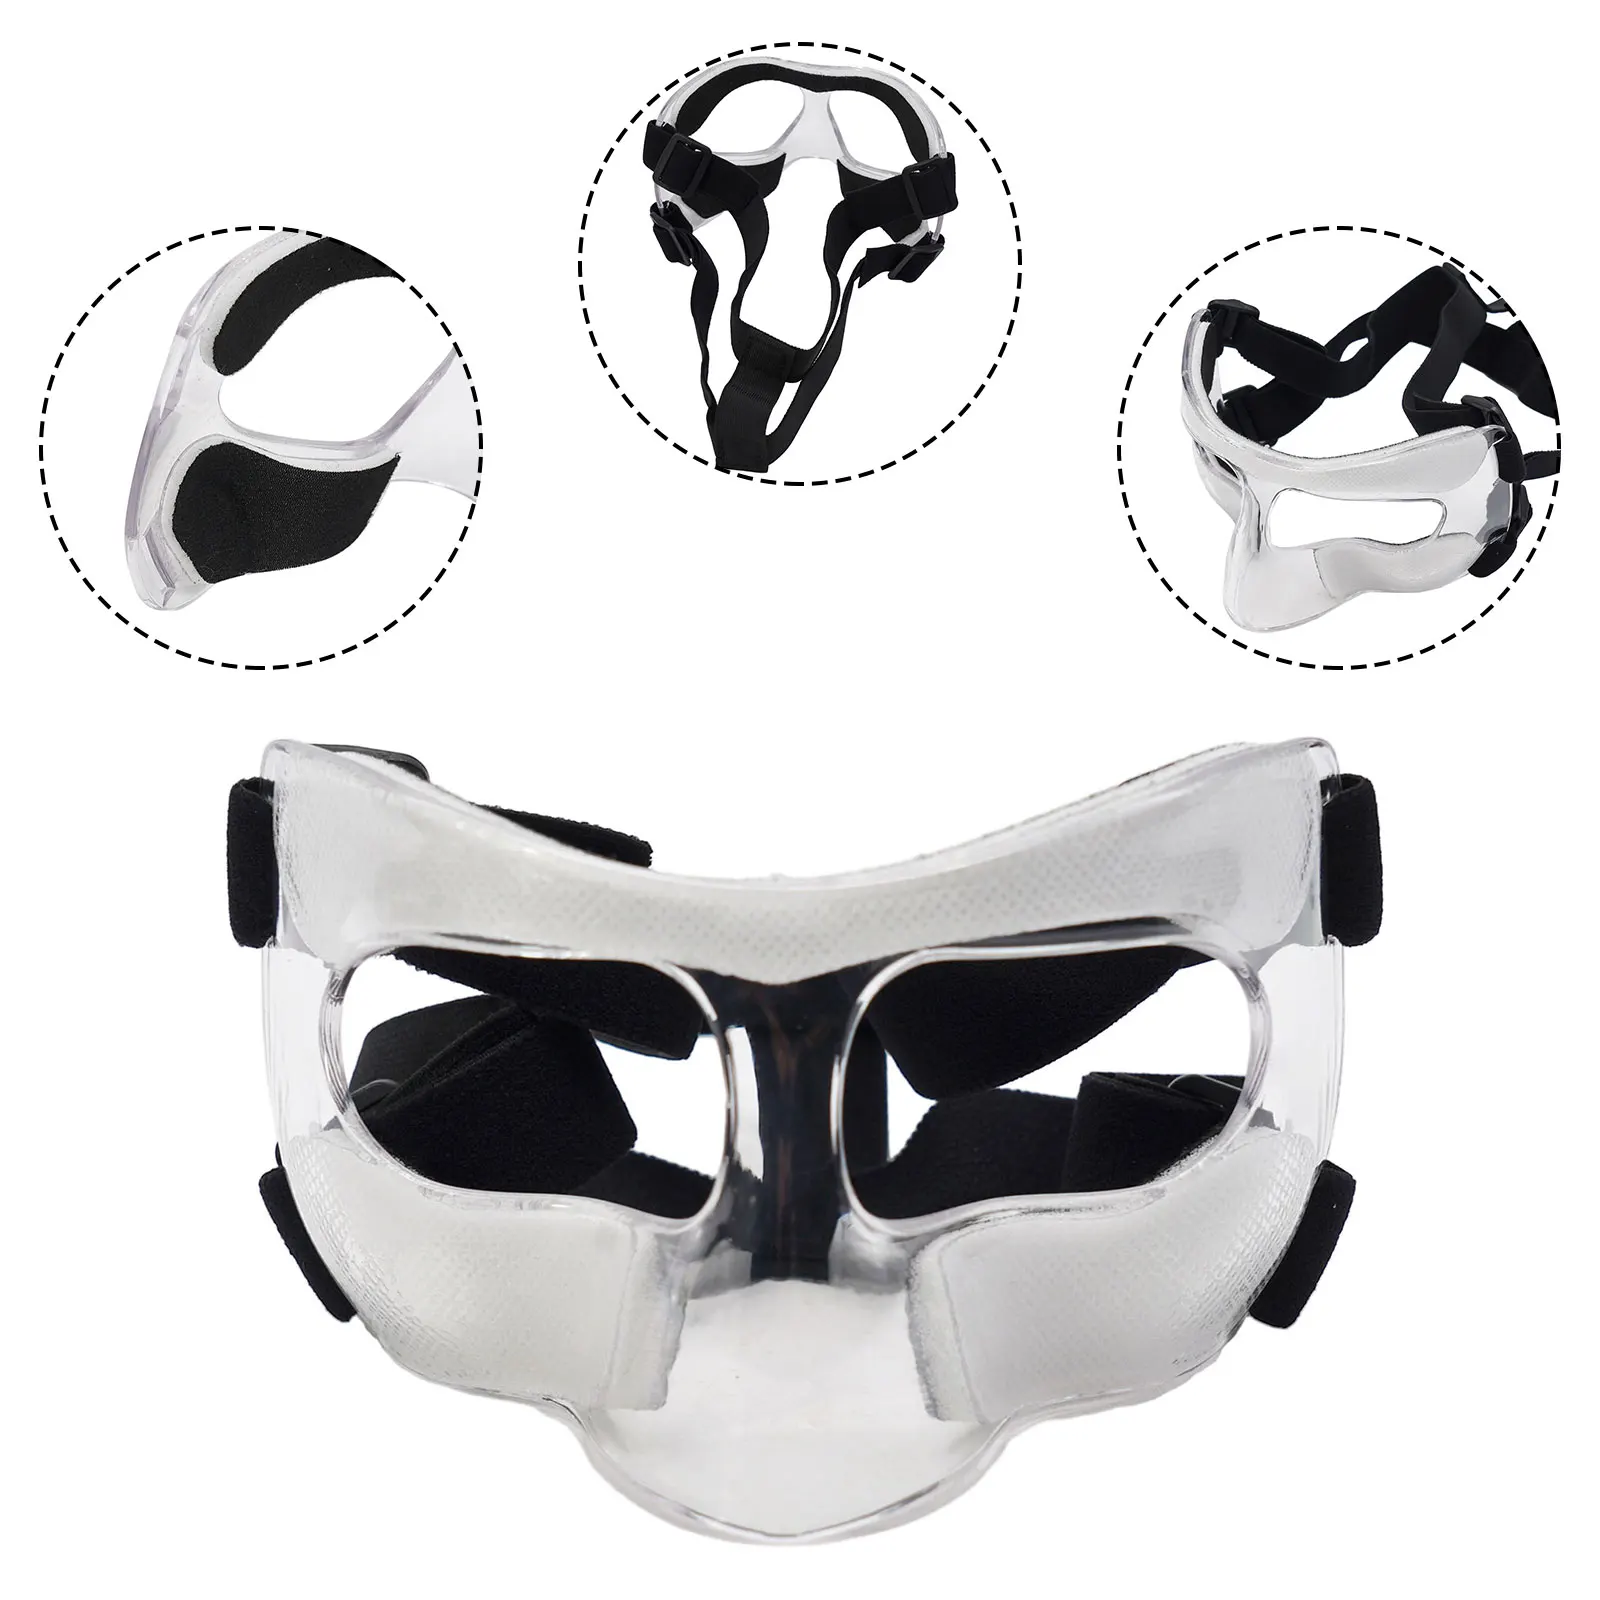 

Durable High Quality Nose Guard Protective Clear Comfortable Plastic Replacement Adjustable Anti Collision 1 Pc